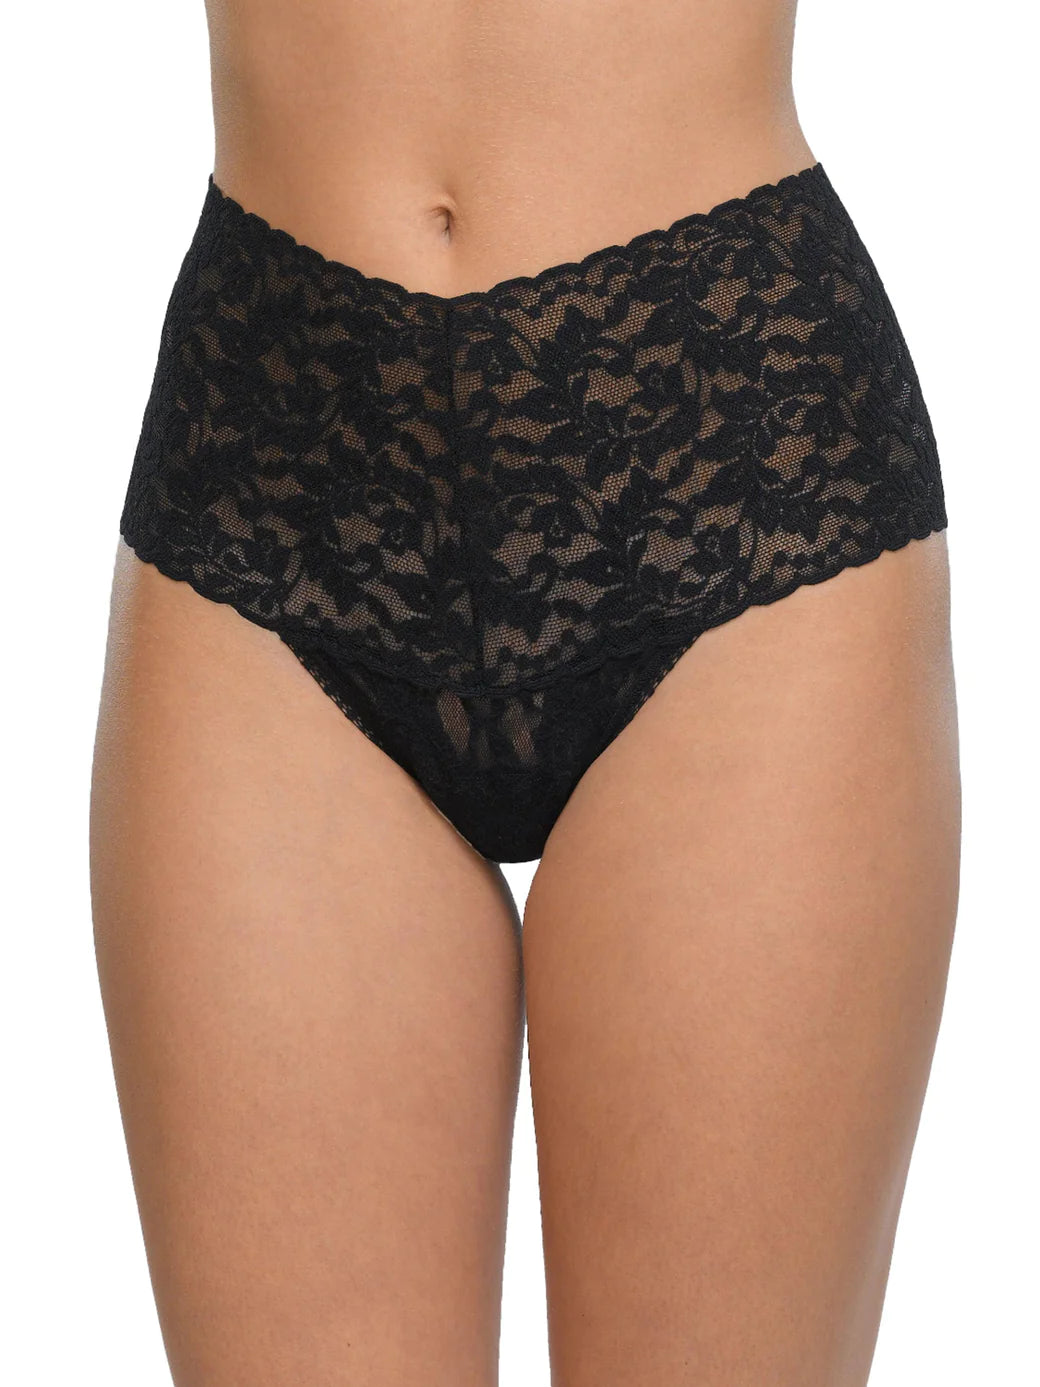 model wearing Retro Signature Lace Thong In Black - Hanky Panky